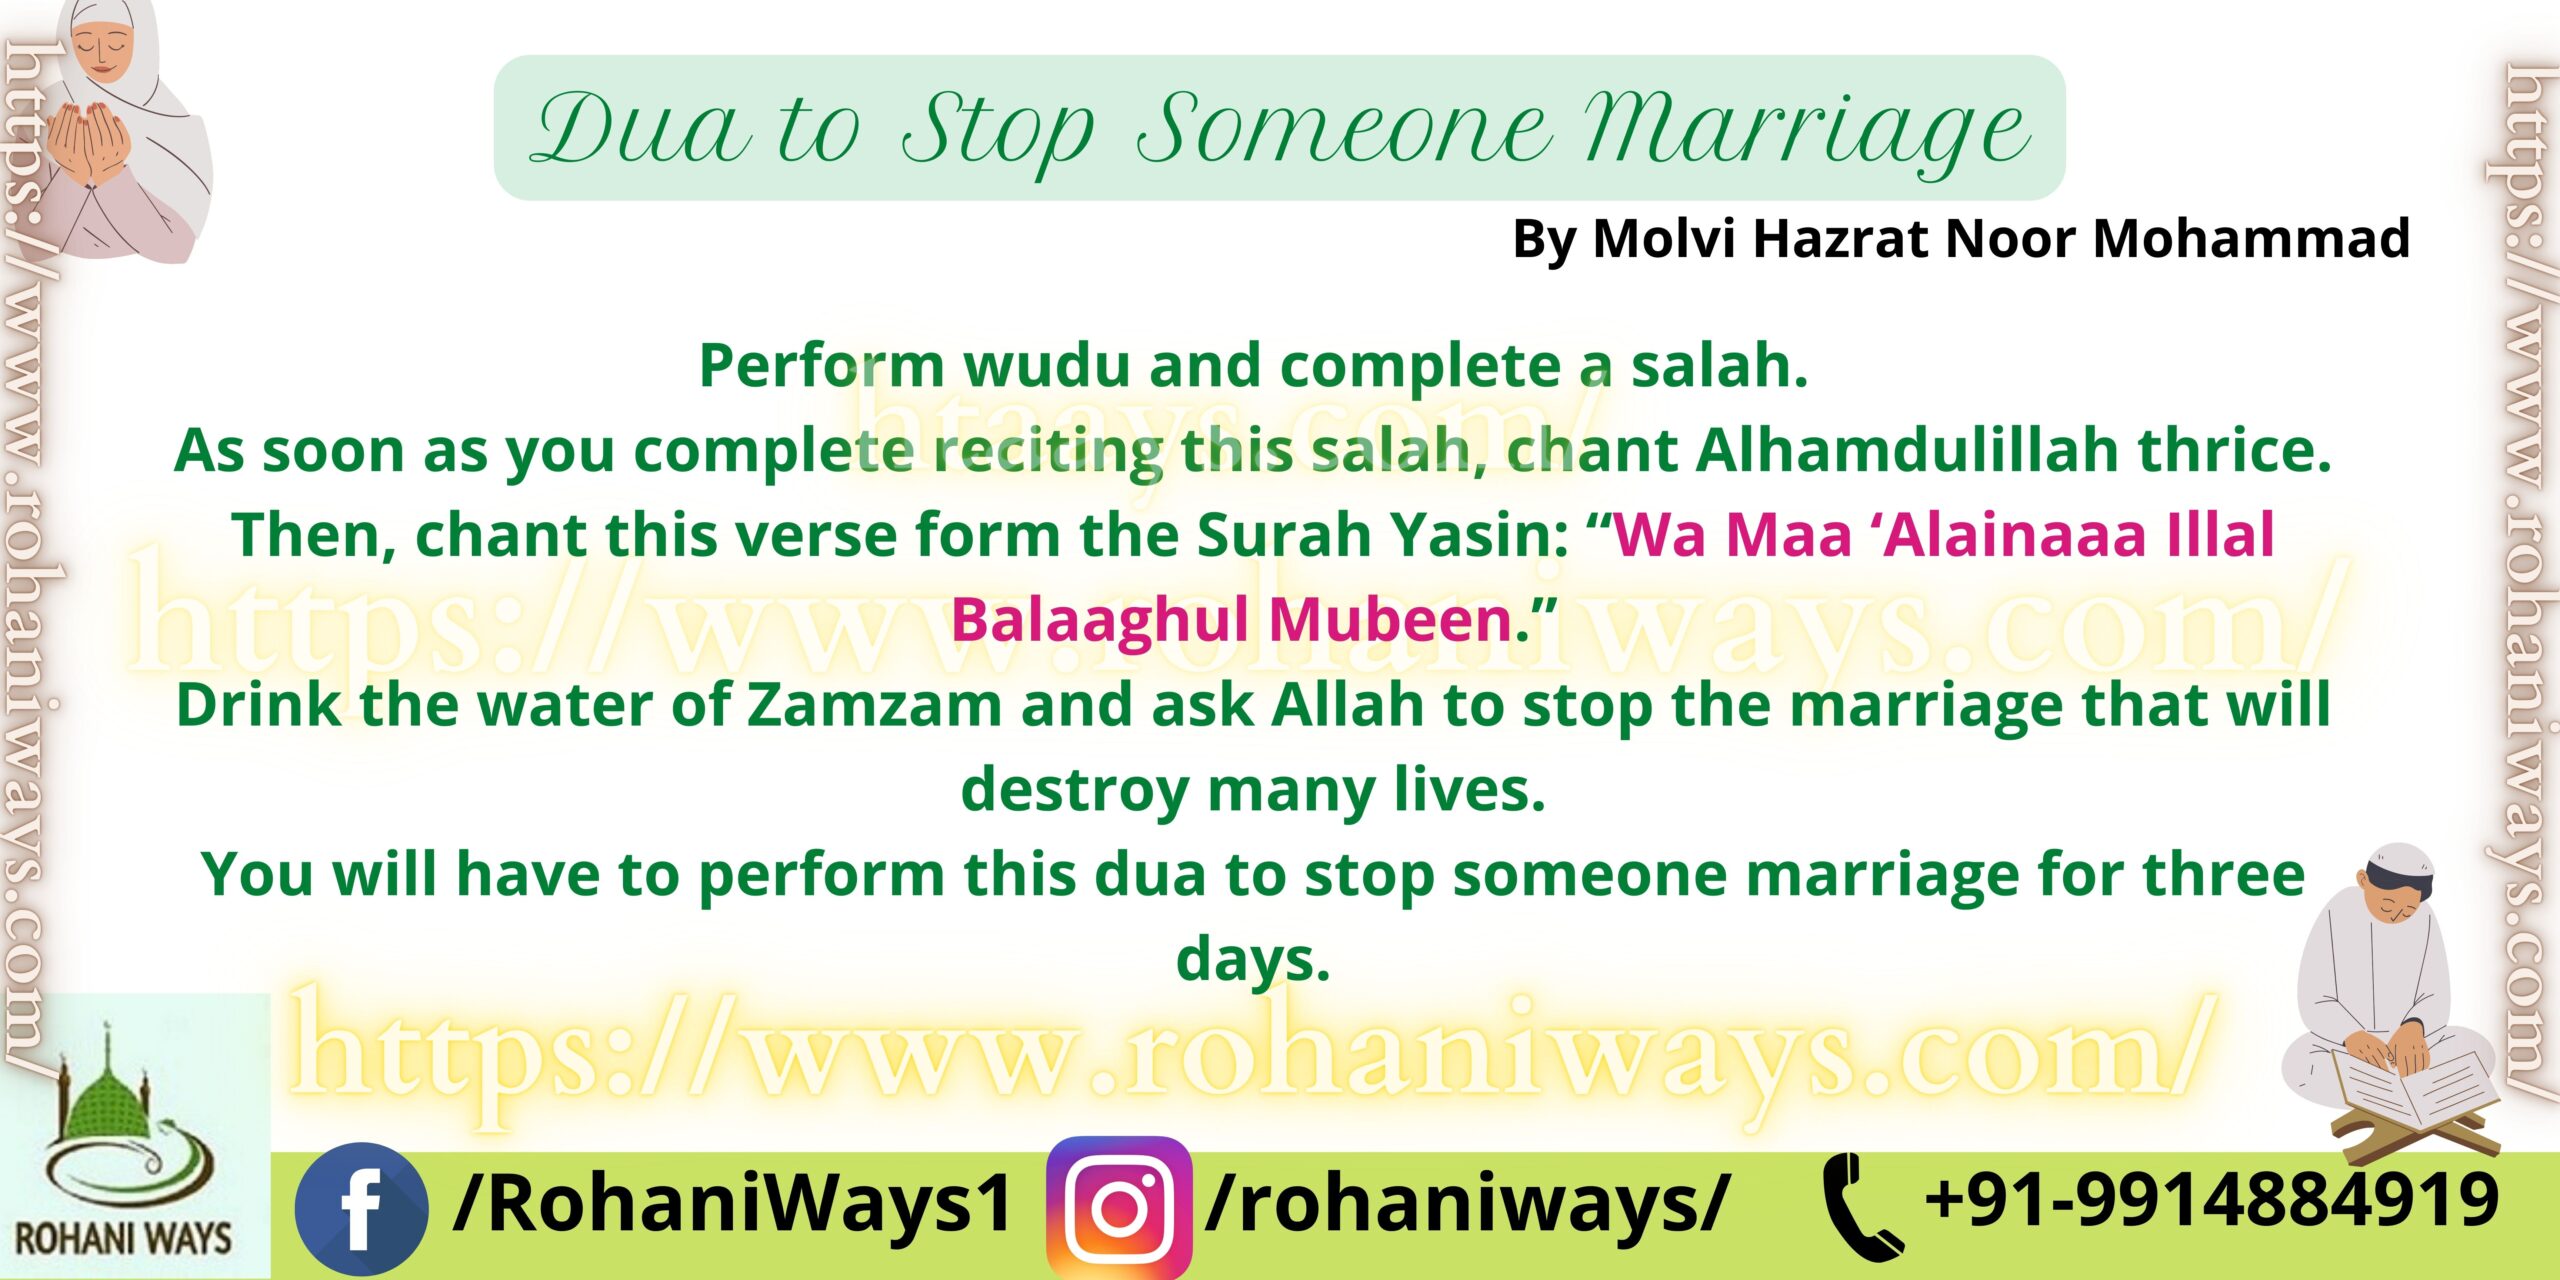 dua to stop someone marriage